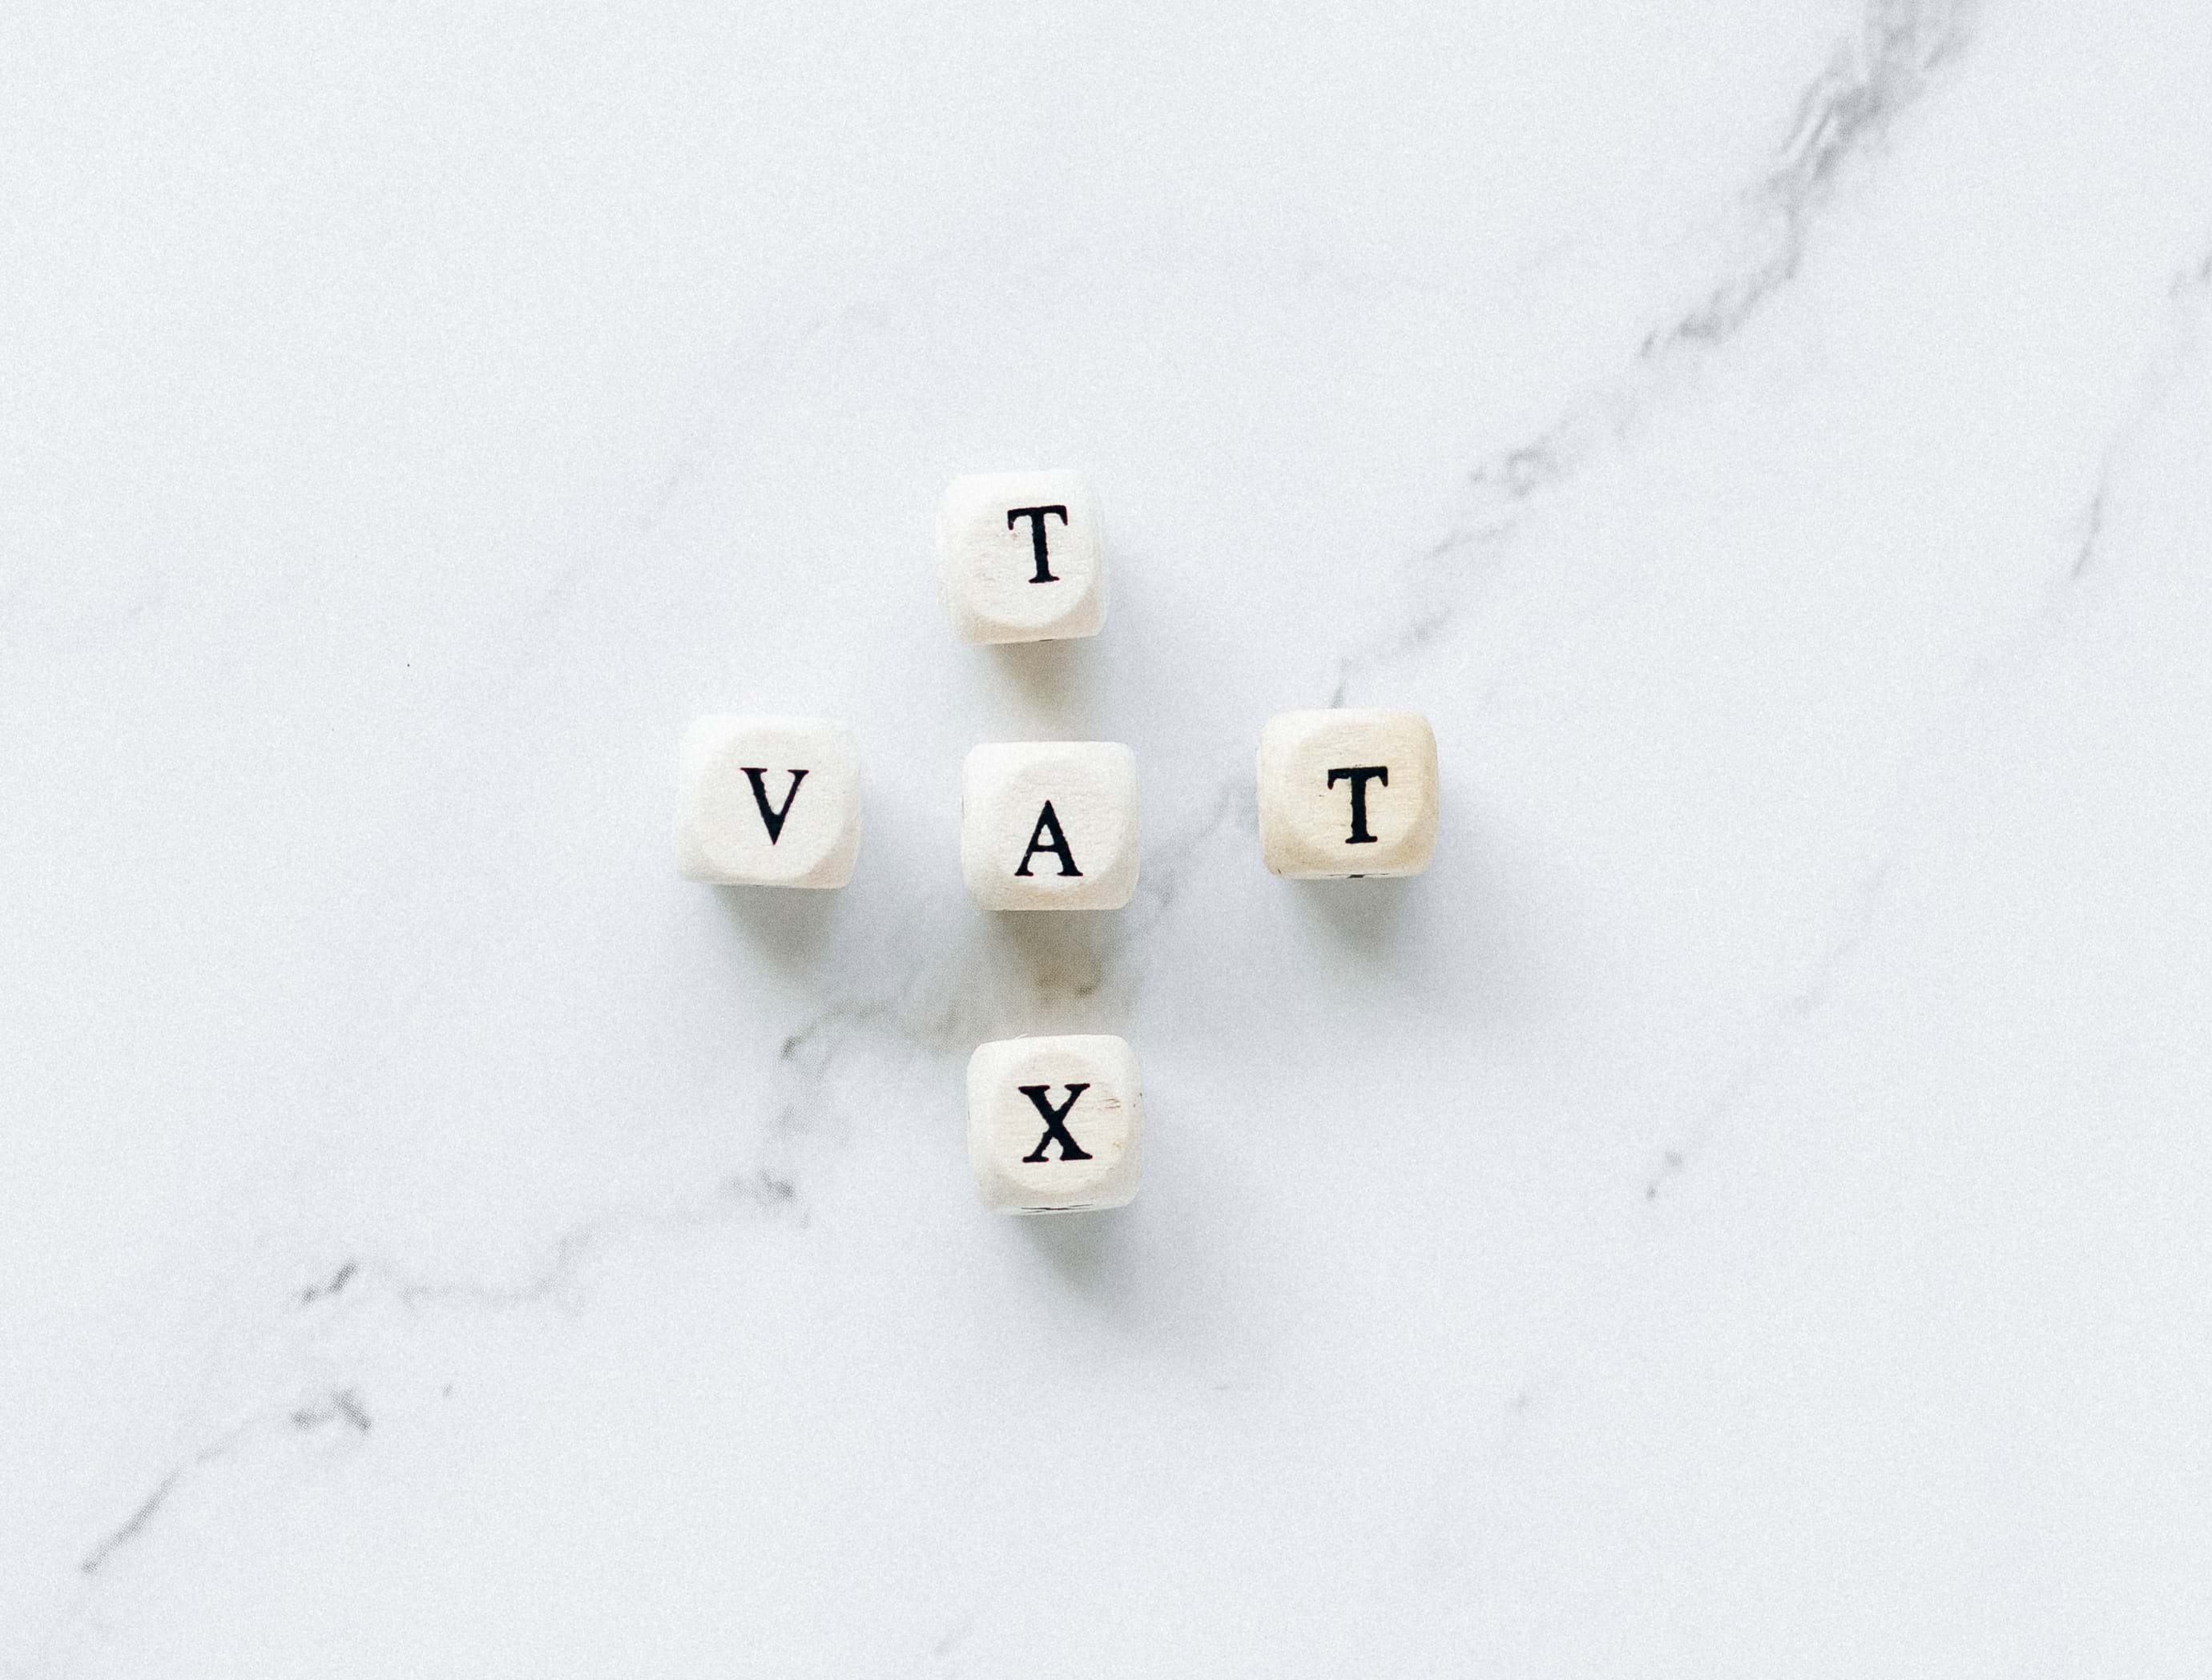 Dice spelling out 'Tax' and 'VAT'